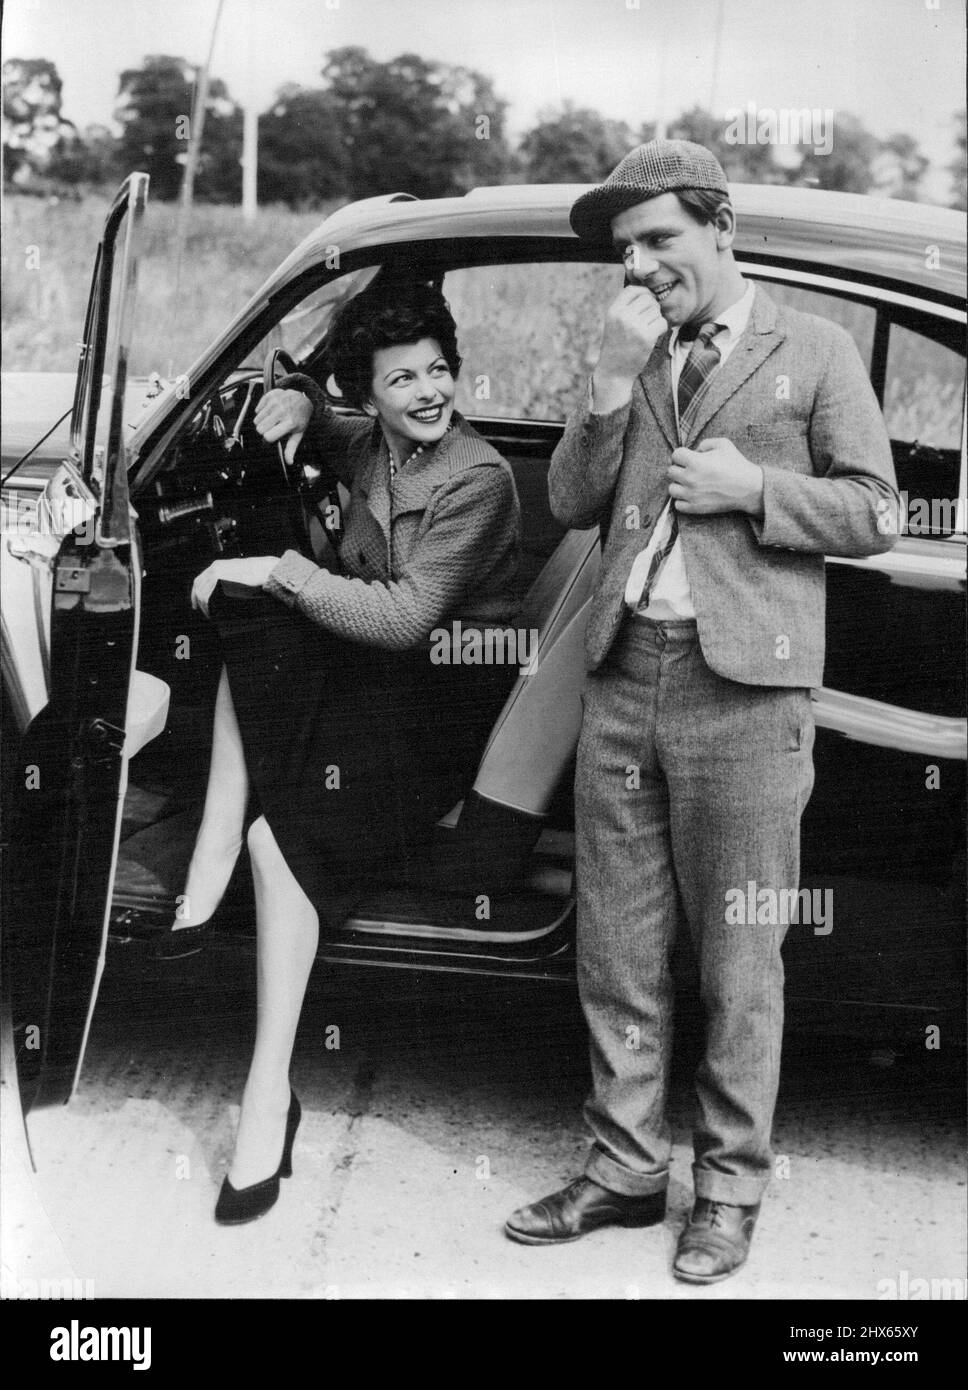 Going My Way? - Bashful little man requesting a lift from actress Joan Rice is comedian Norman Wisdom. They are pictured at Pinewood Studios, where they are filming together in 'One Good Turn', Norman Wisdom's second screen comedy. The film is being produced by Maurice Cowan and directed by John Paddy Carstairs - the team responsible for Wisdom's successful first film 'Trouble in store'. August 7, 1954. Stock Photo